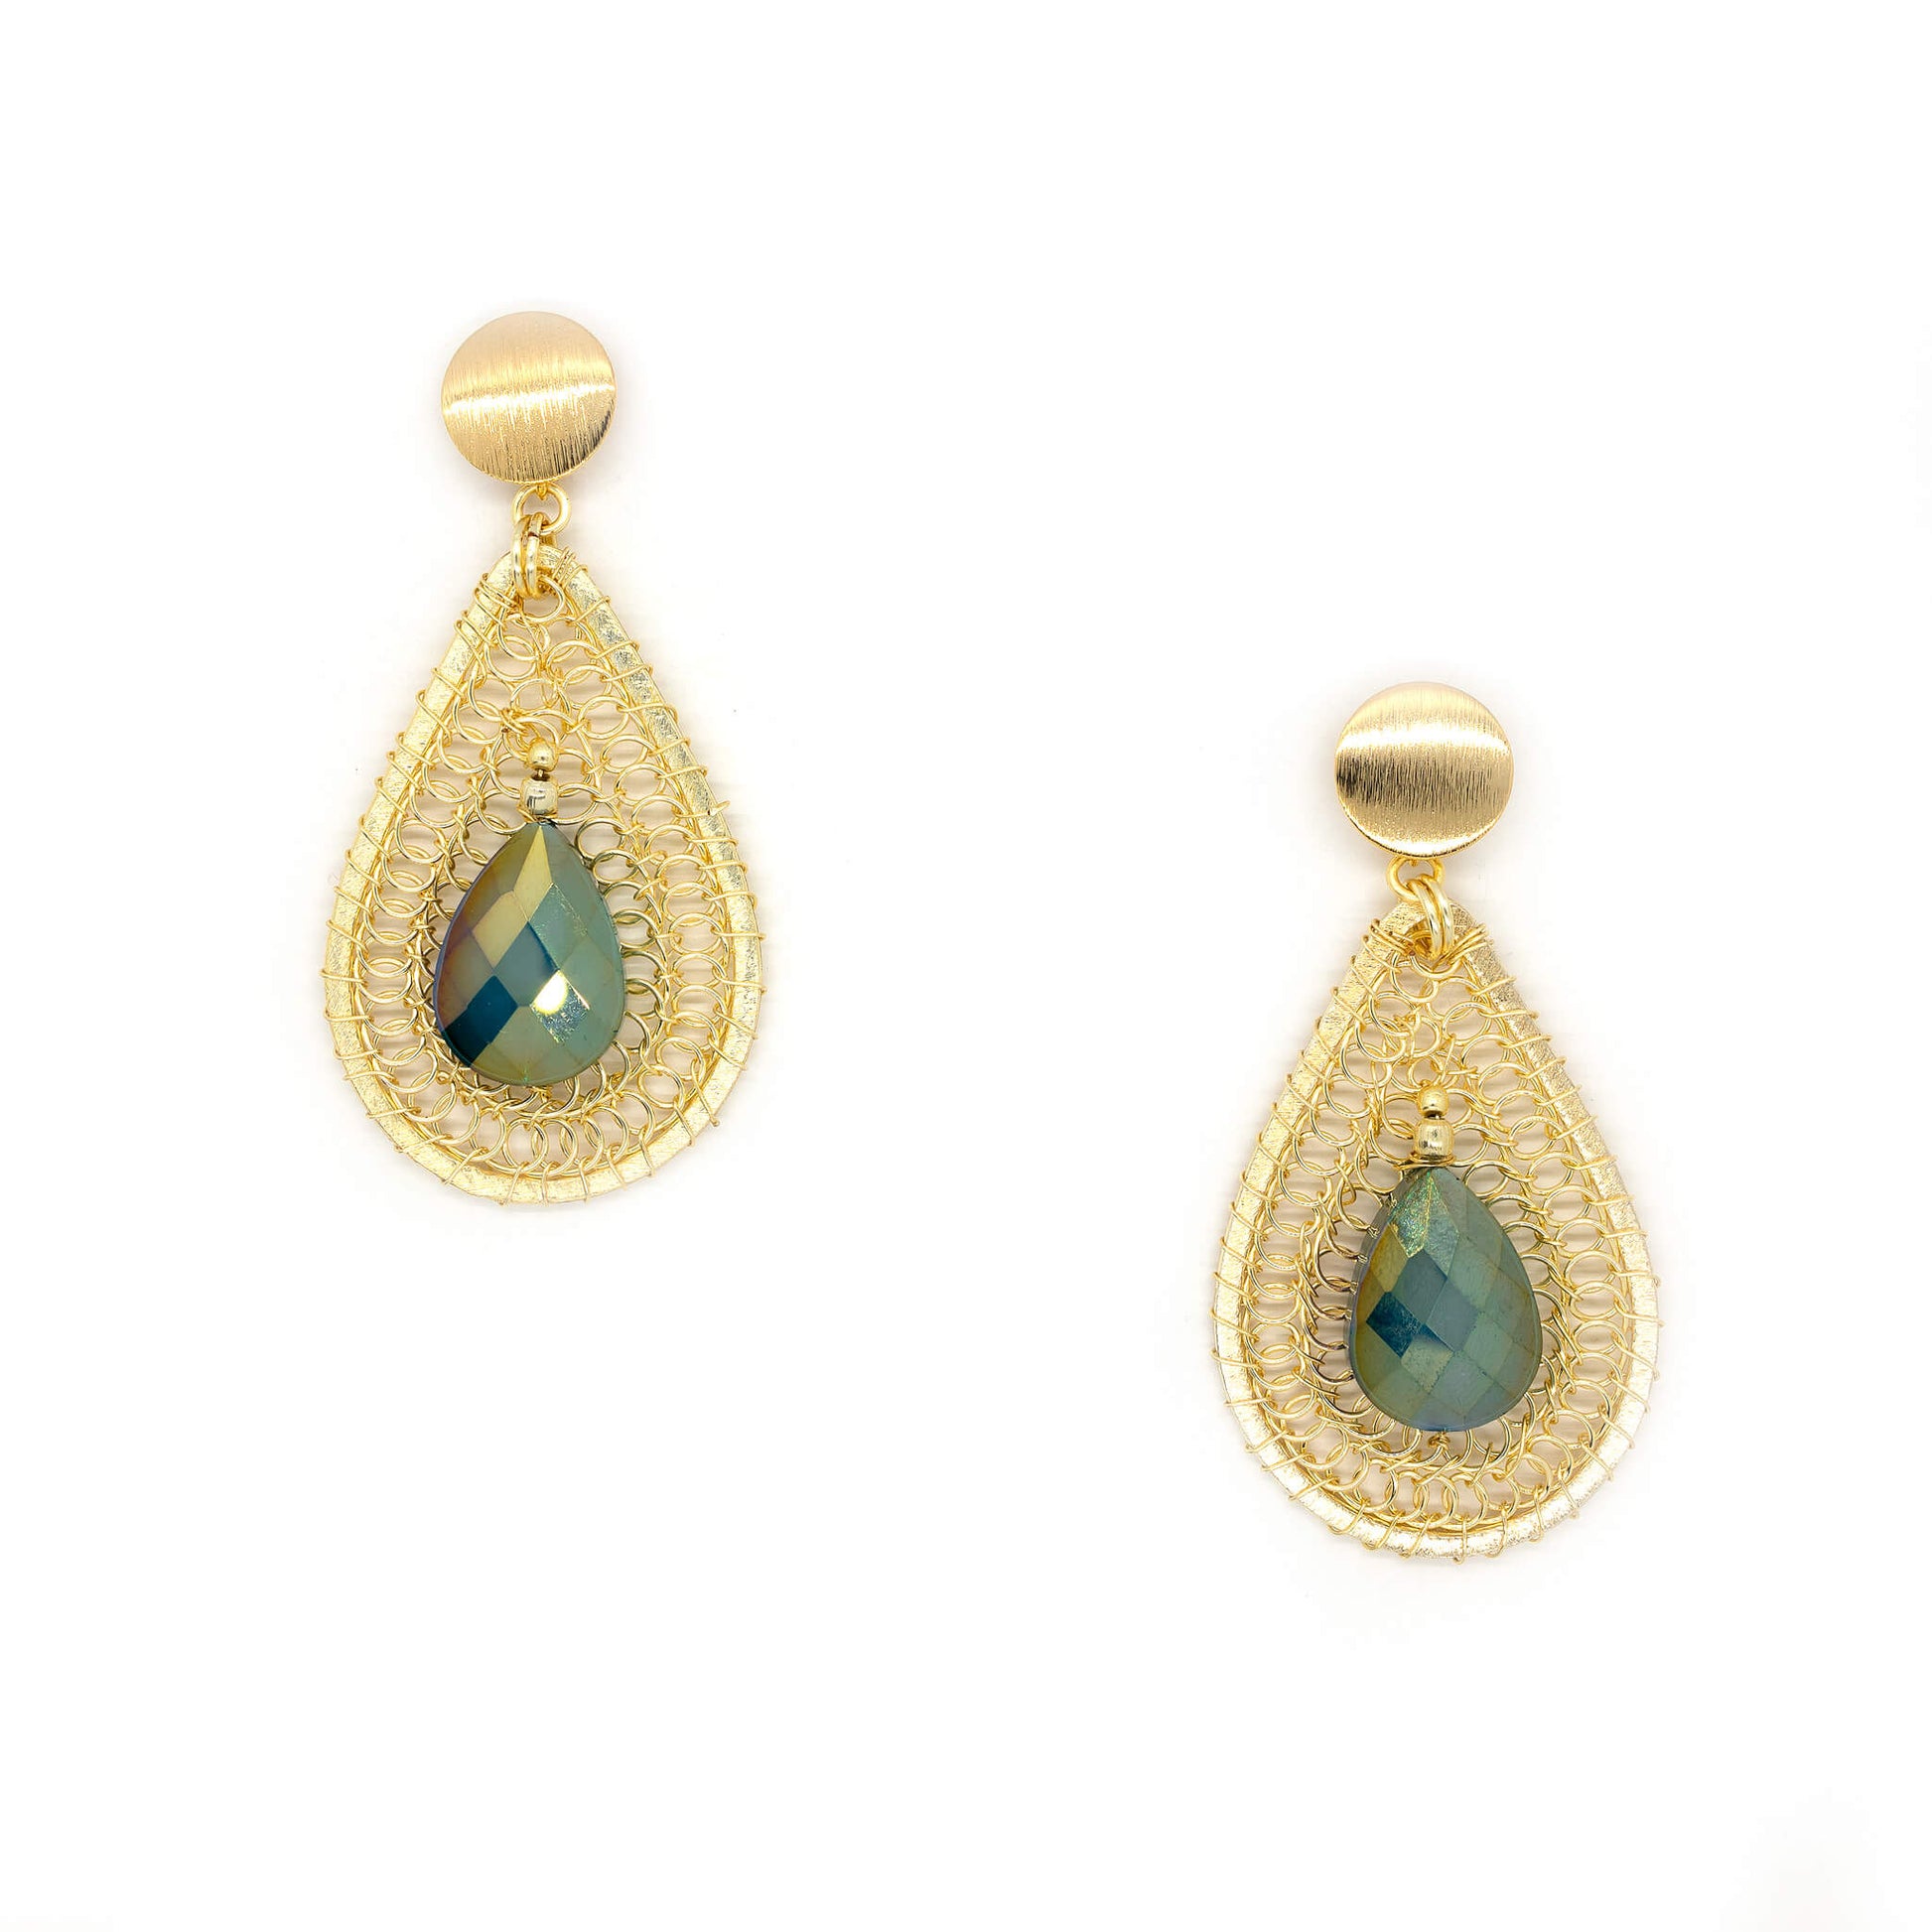 Devasshree dangle Earrings are 2.5 inches long. Gold and Green earrings. Handmade with non-tarnish gold plated wire and Crystal Beads. Teardrop wire wrapped Earrings.